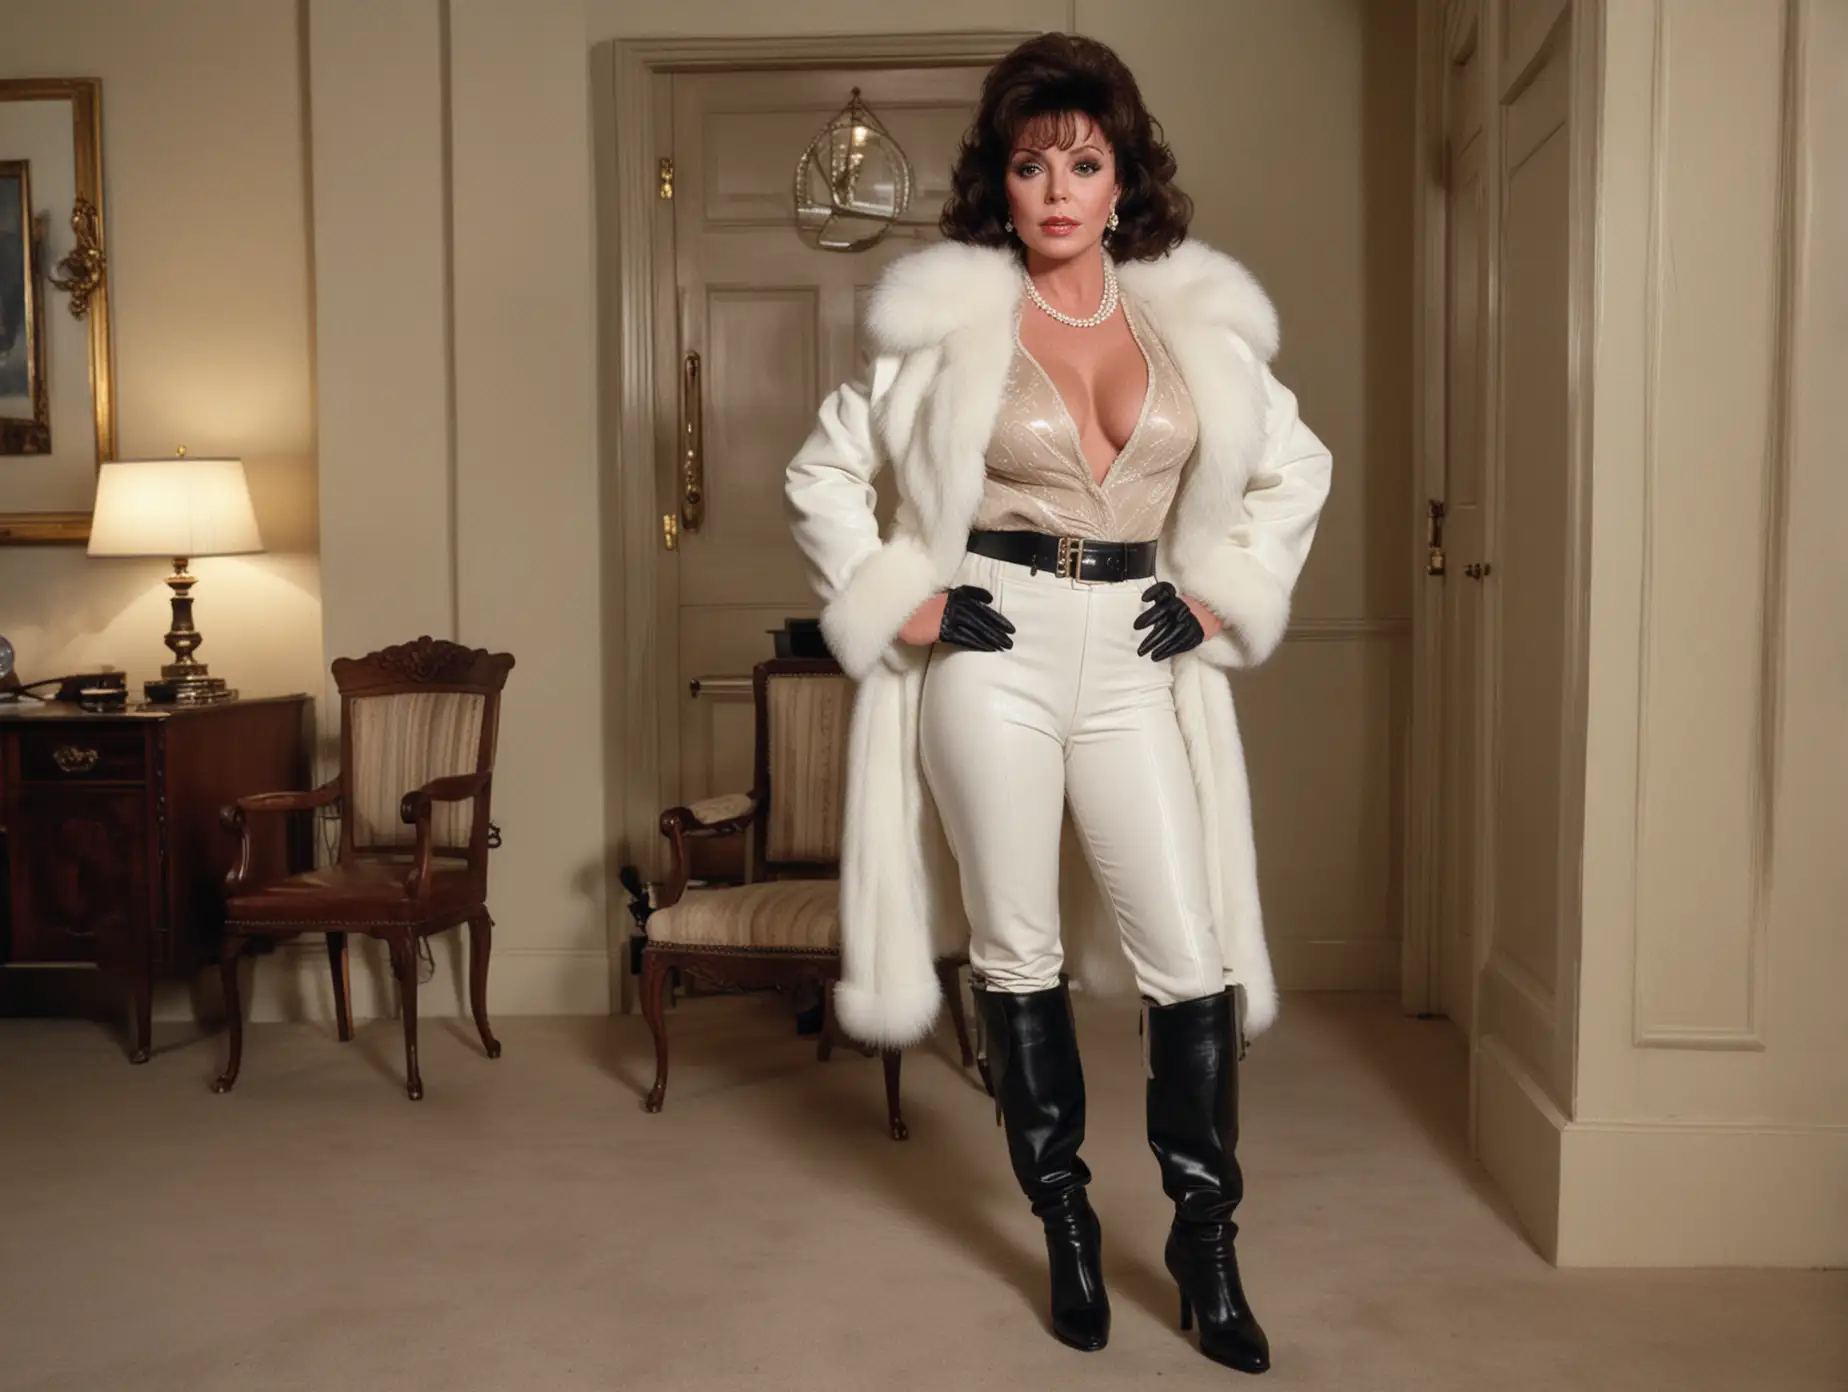 a full LENGTH view of a very busty, very stern looking 1980S JOAN COLLINS WITH BIG hair as ALEXIS FROM DYNASTY wearing a WHITE FUR COAT ,WHITE leather pants black leather gloves, black leather boots,, sTANDING ON THE FLOOR in HER EXECUTIVE OFFICE